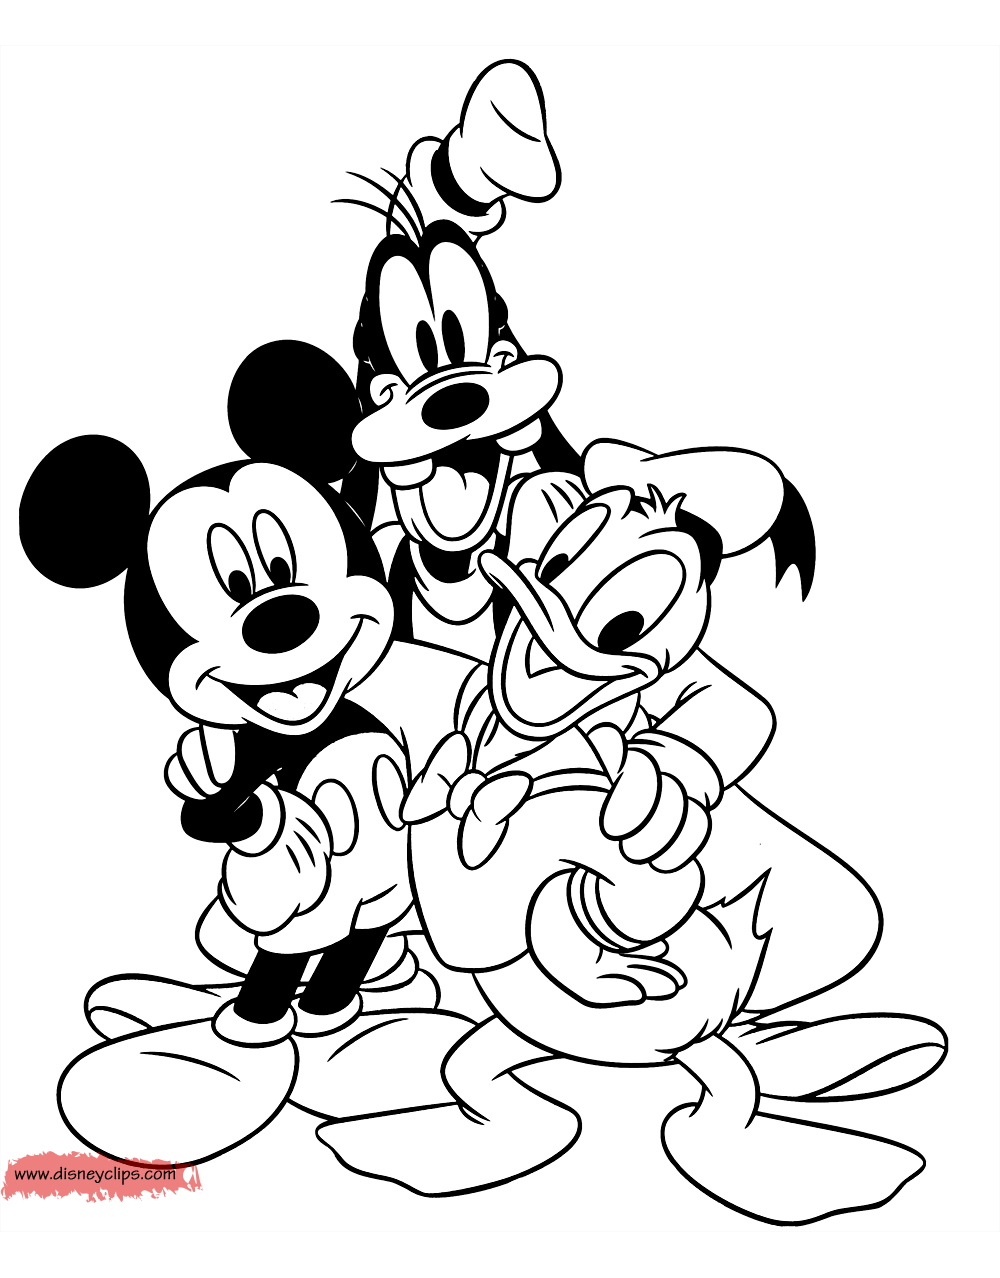 Mickey Mouse Friends Coloring Pages 2 Disney s World